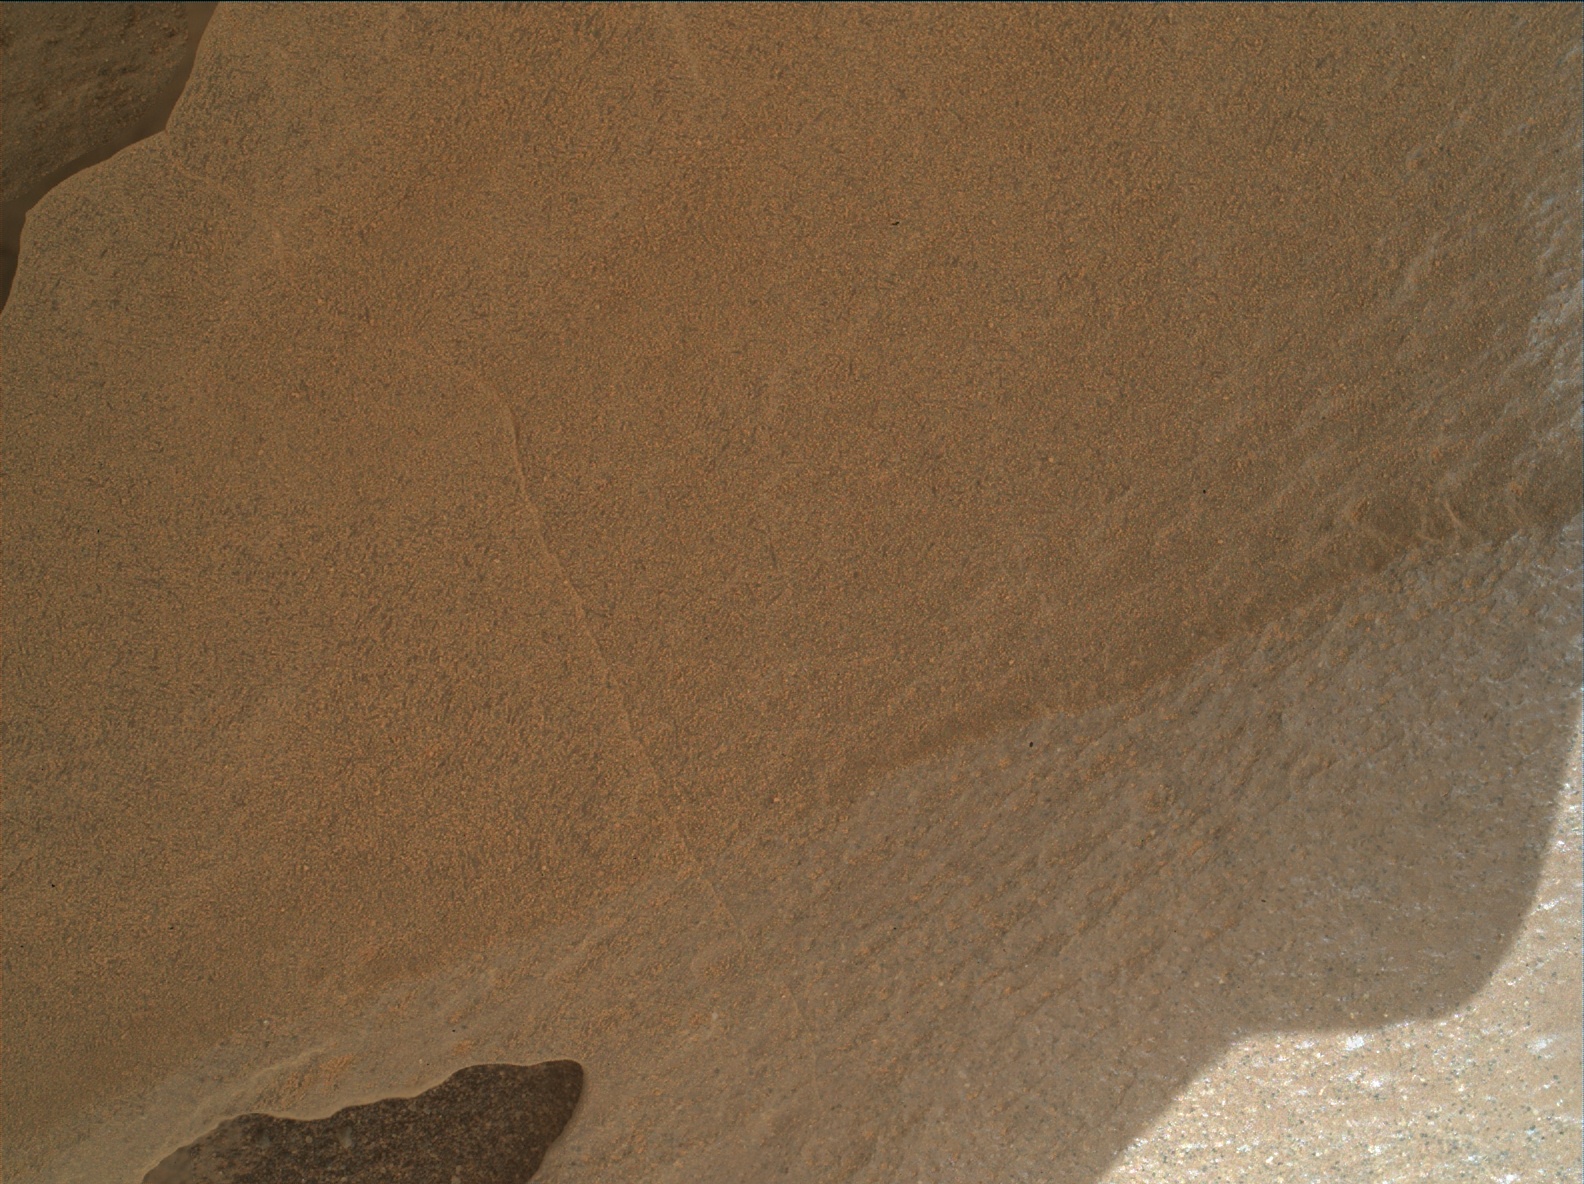 Nasa's Mars rover Curiosity acquired this image using its Mars Hand Lens Imager (MAHLI) on Sol 1686